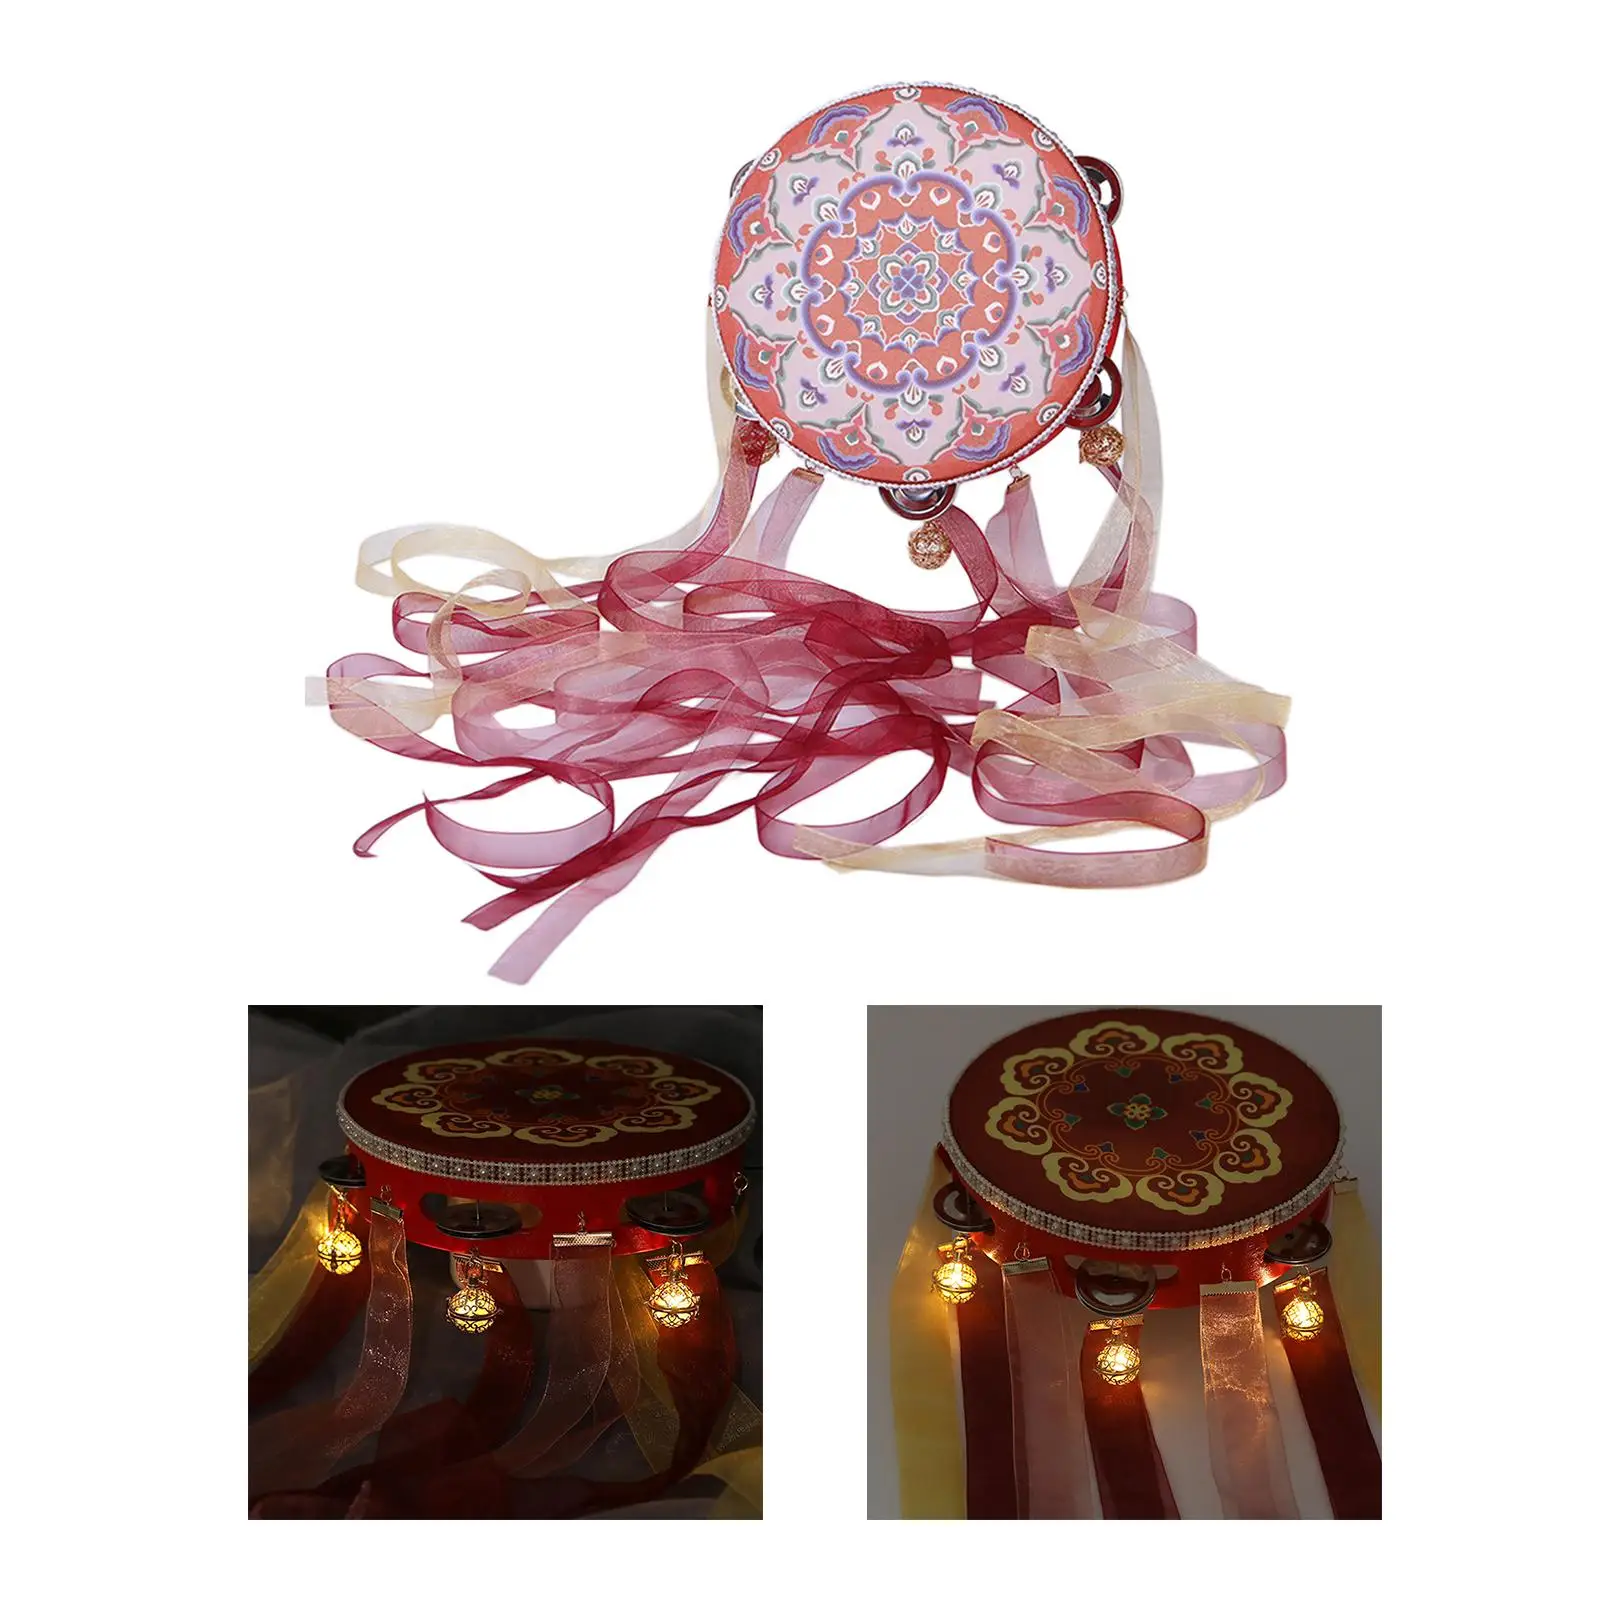 Decorative Tambourine 7.28 with Ribbon Portable Hand Drum Musical Instrument for Party Supplies Dancing Festival Adults Children